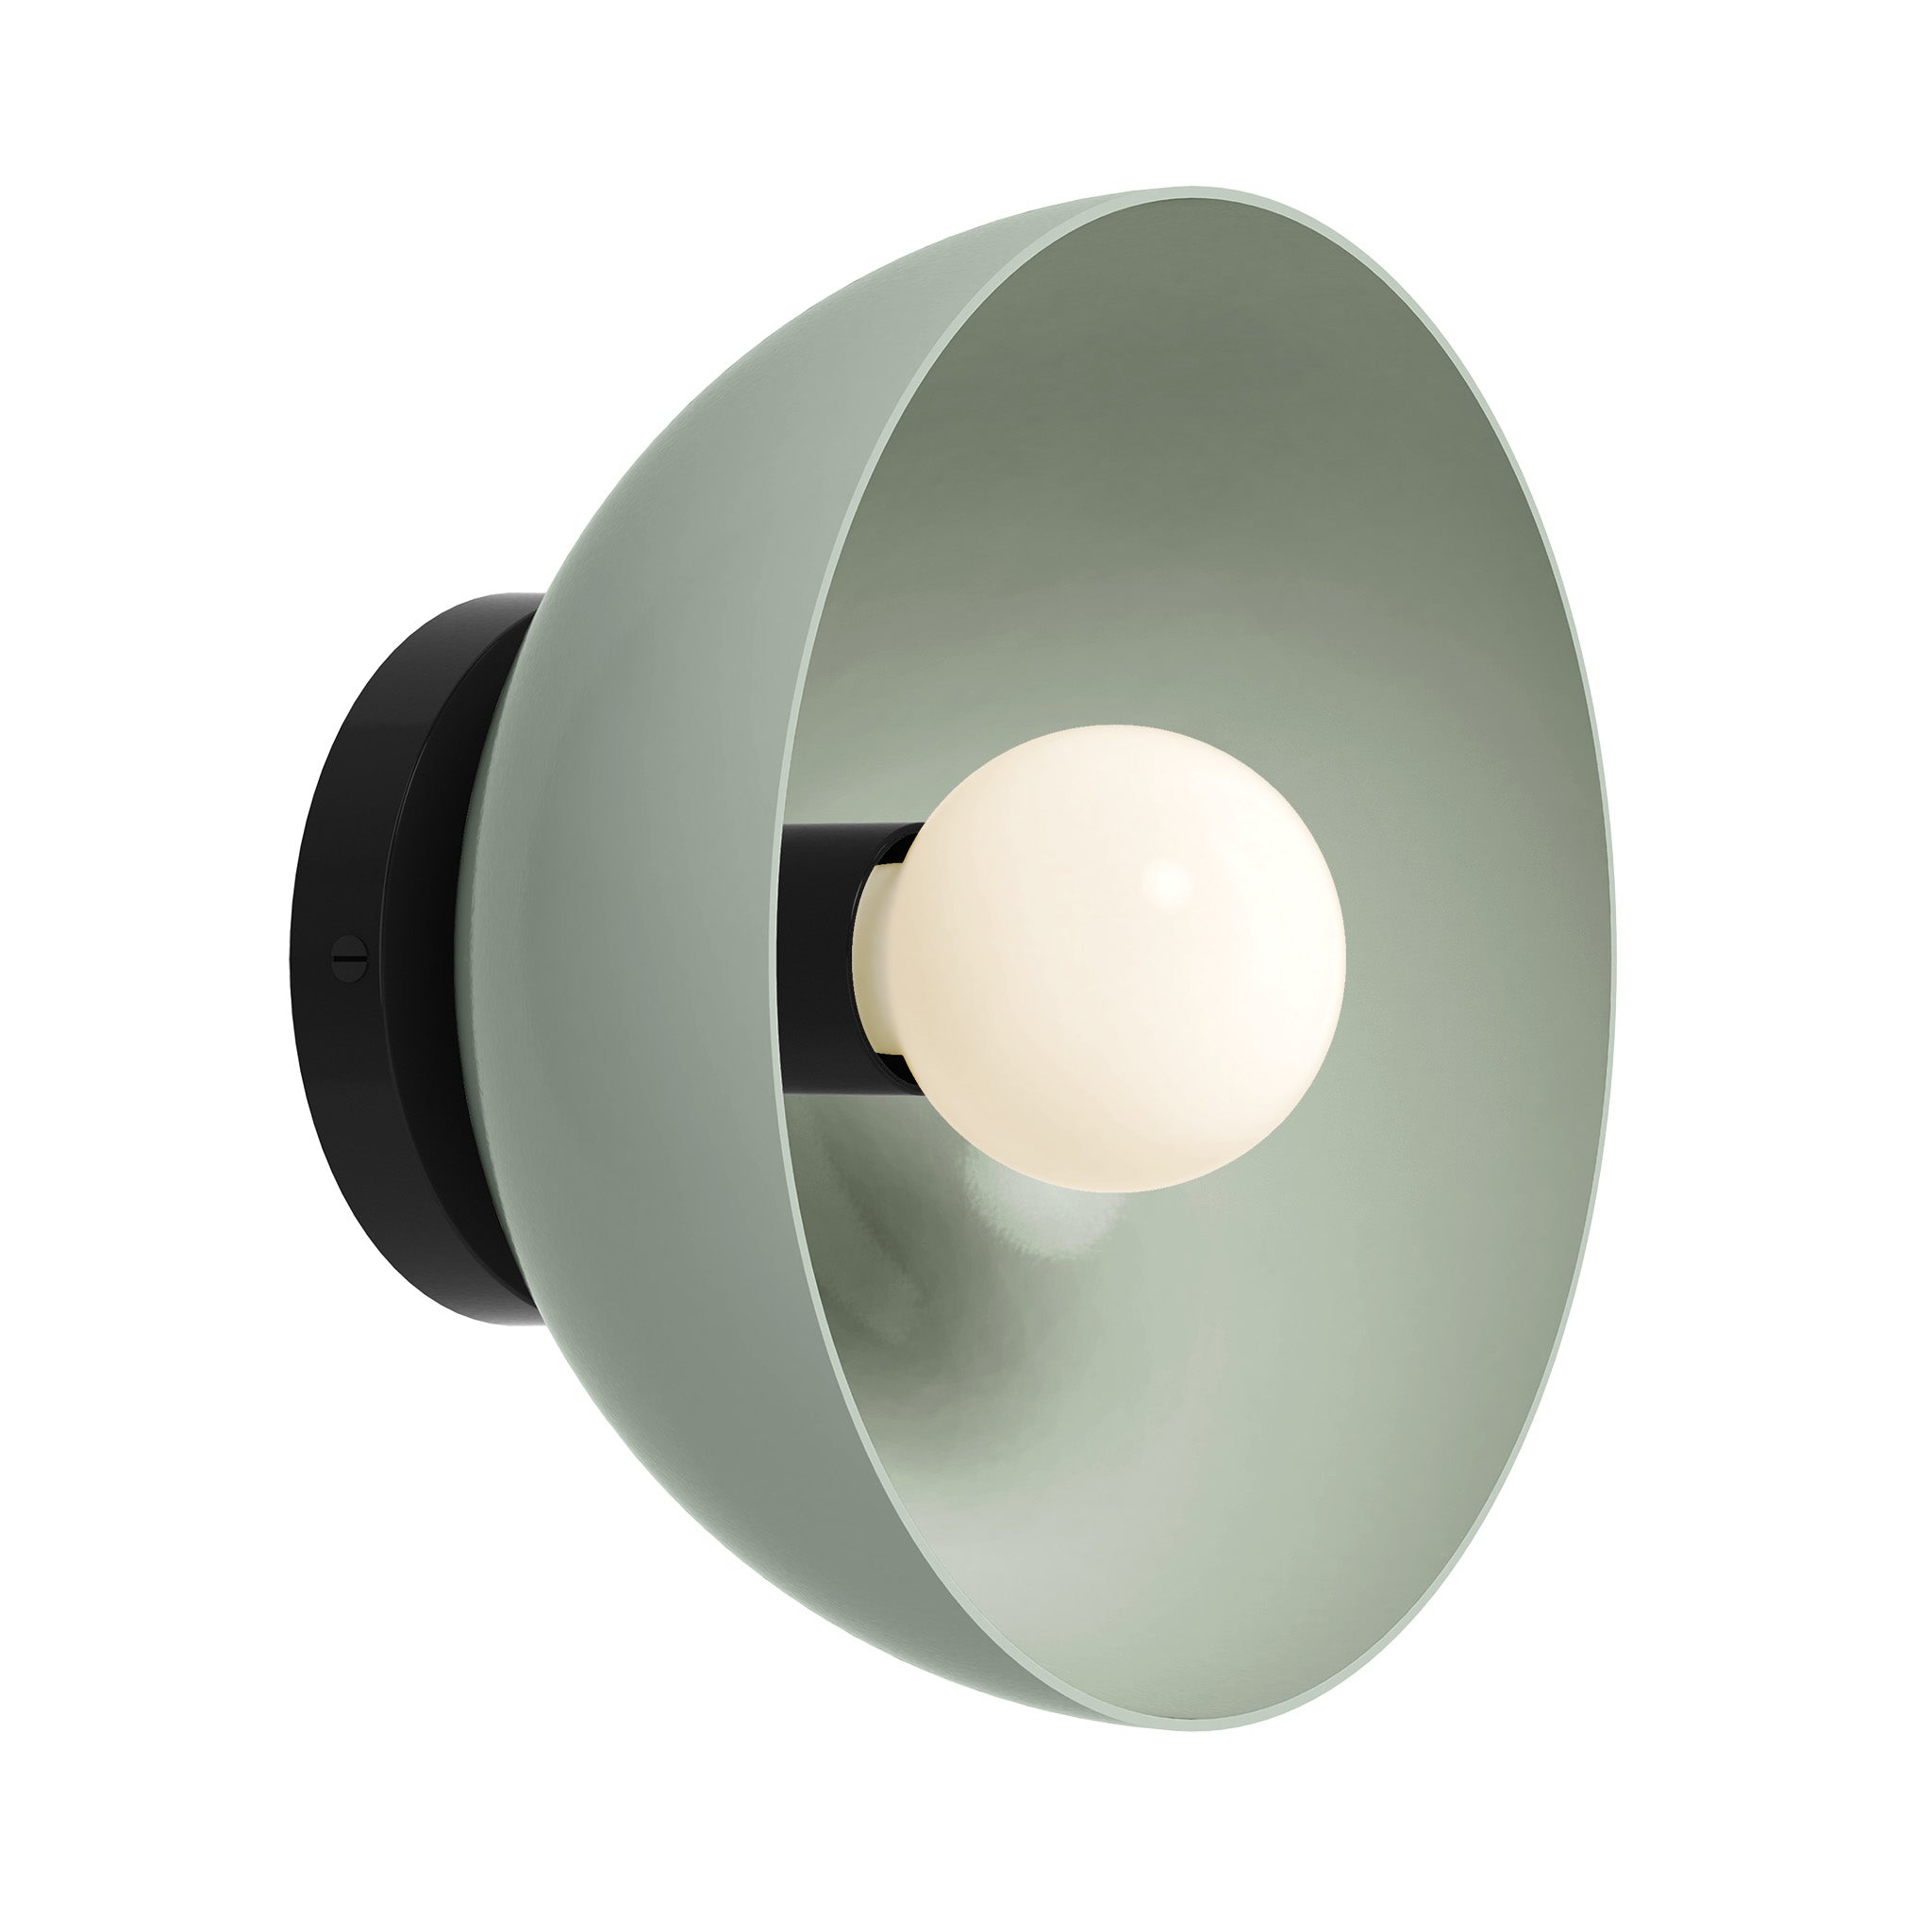 Black and bone color hemi dome sconce 10" Dutton Brown lighting